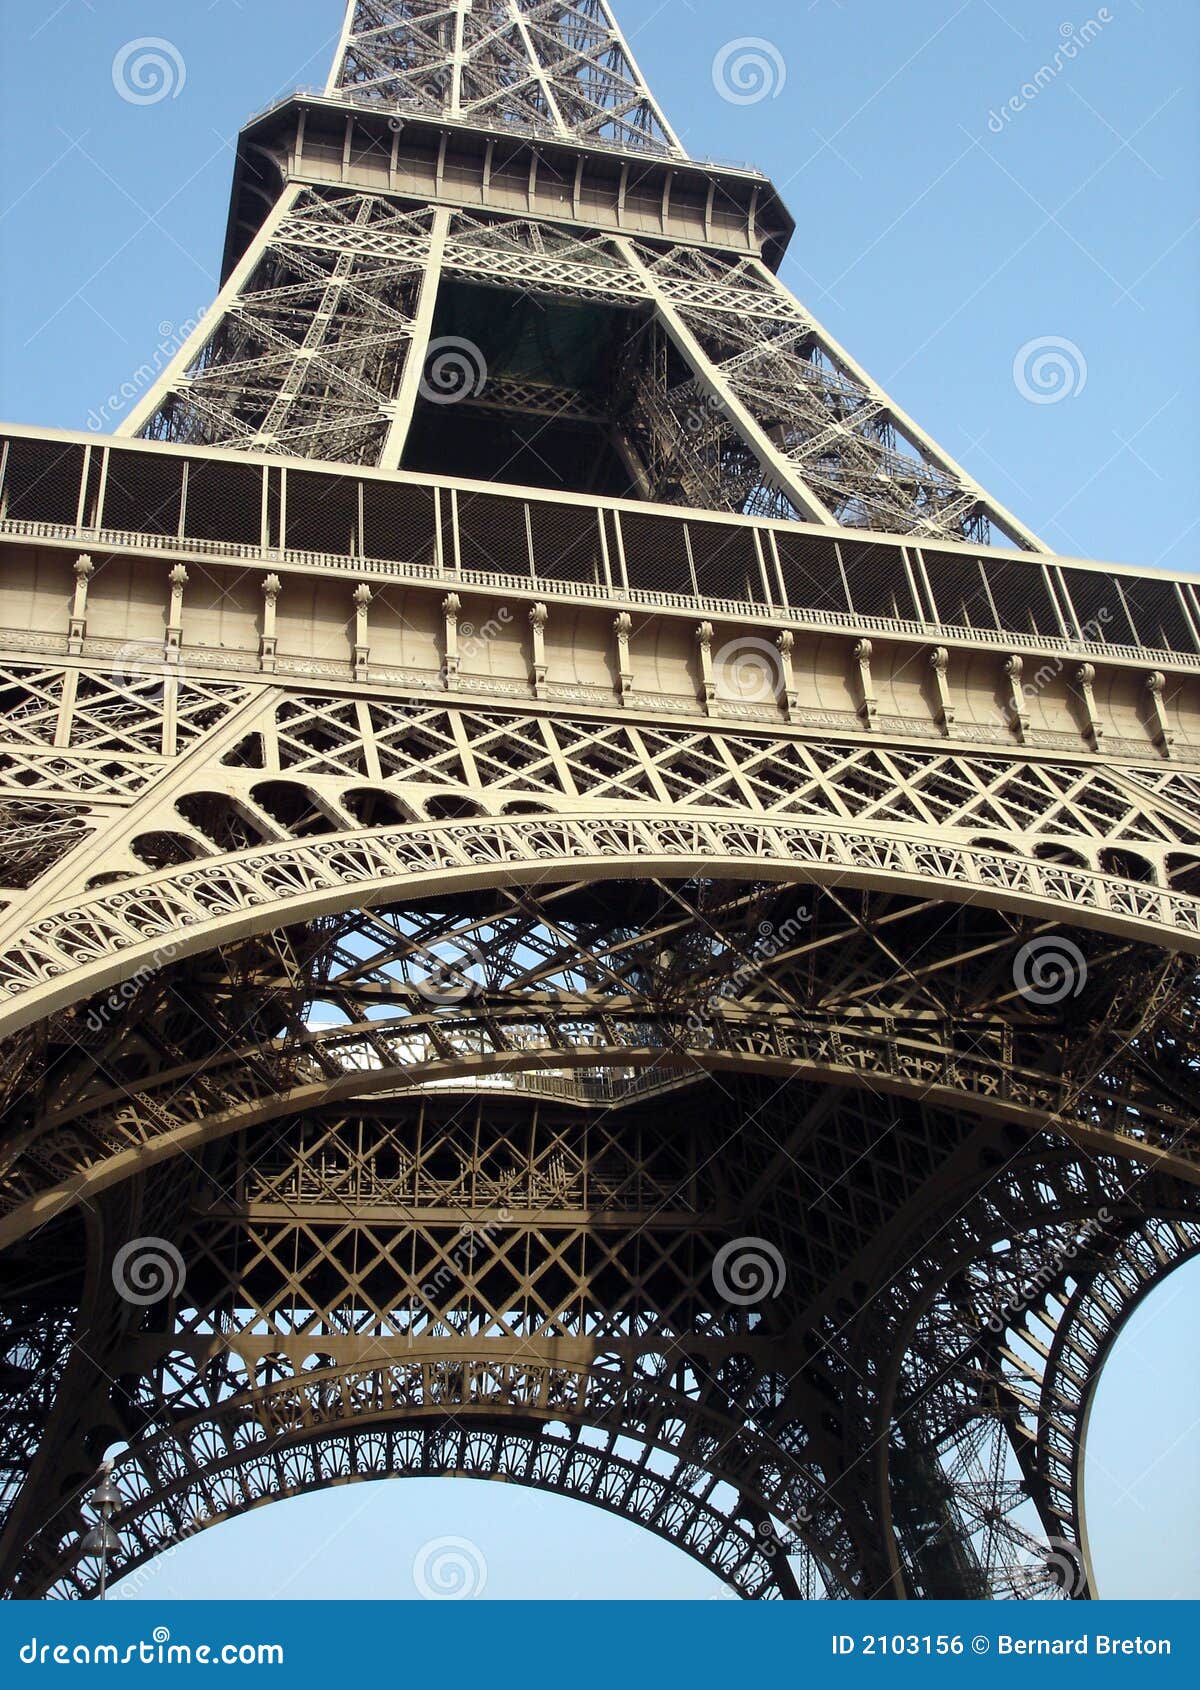 Eiffel Tower Paris France Stock Photo Image Of Grating Down